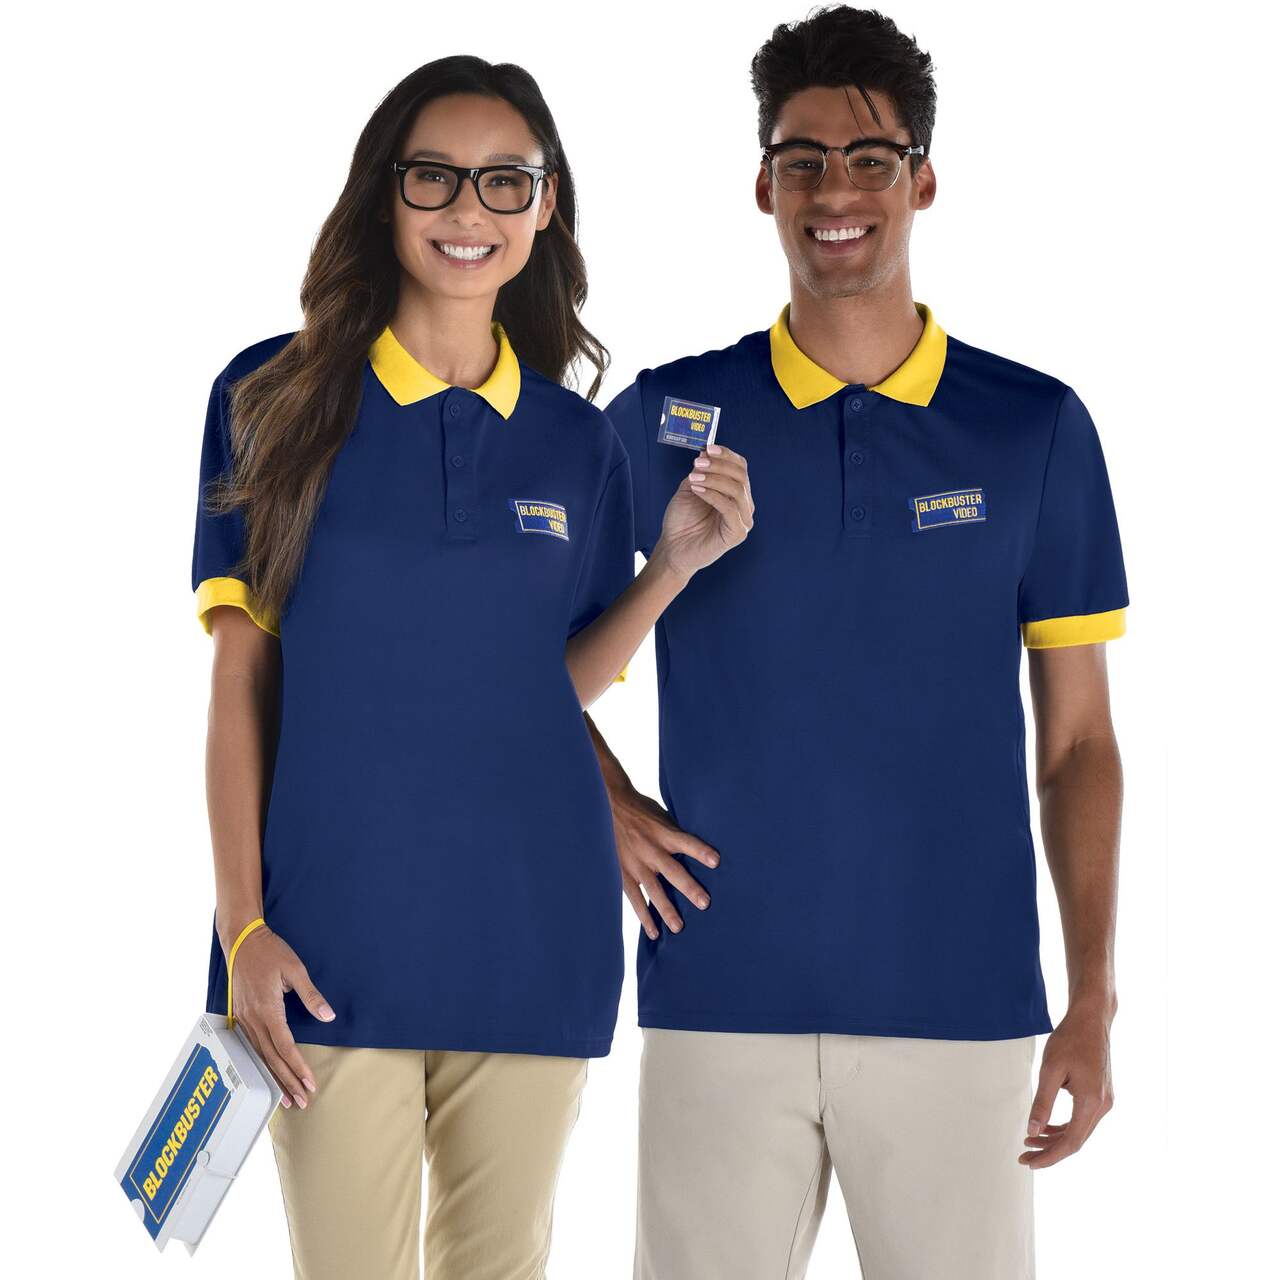 Blockbuster Uniform Kit with T-Shirt, Blue/Yellow, Assorted Sizes, Wearable  Costume Accessory for Halloween